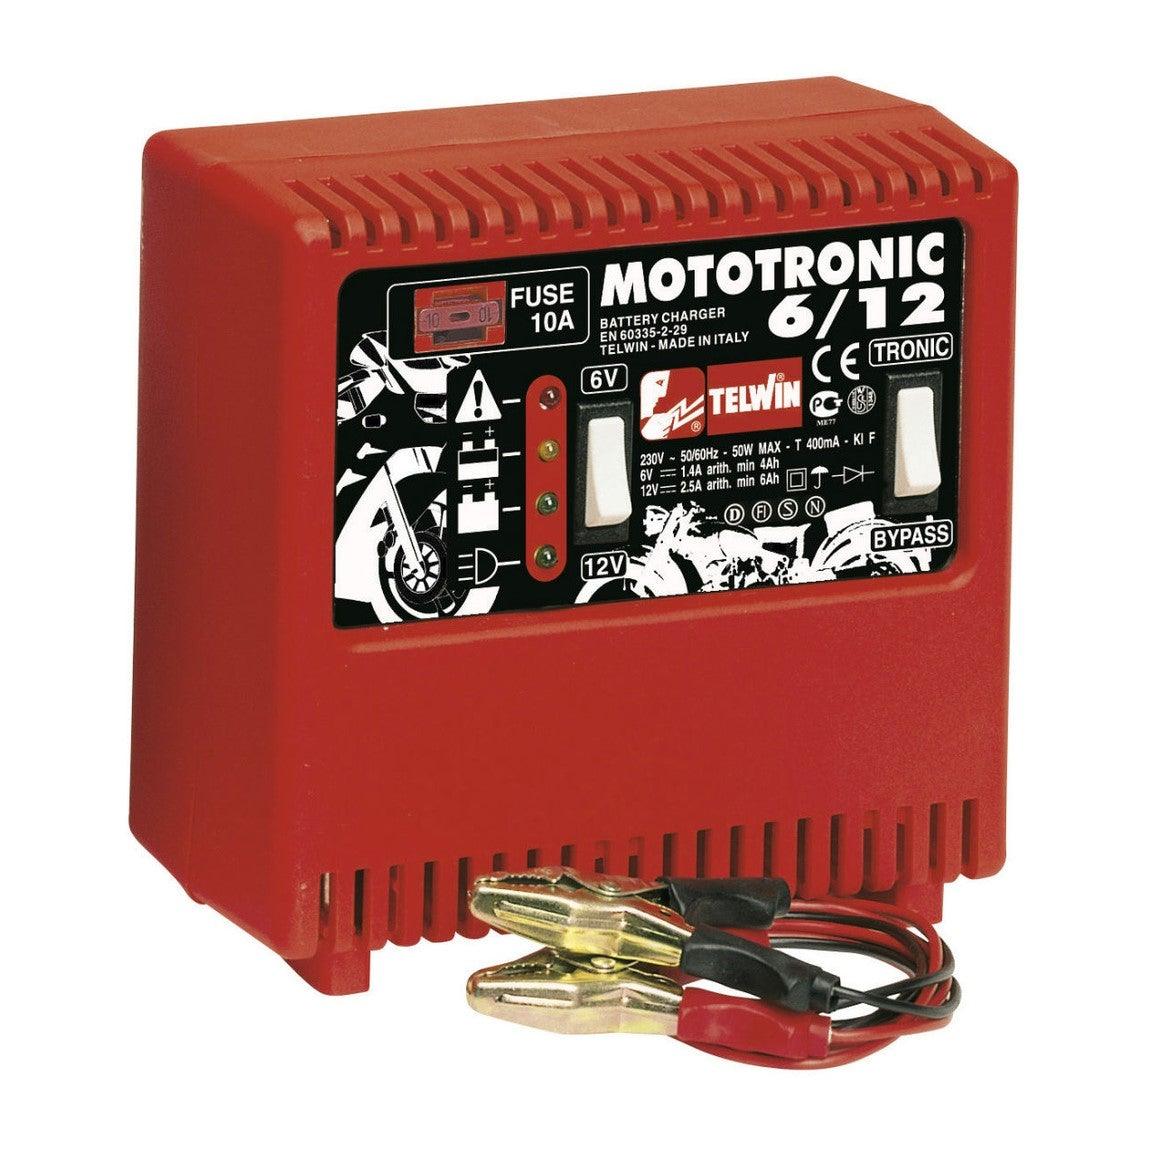 6-12: Mototronic Trading Battery Charger — Takla